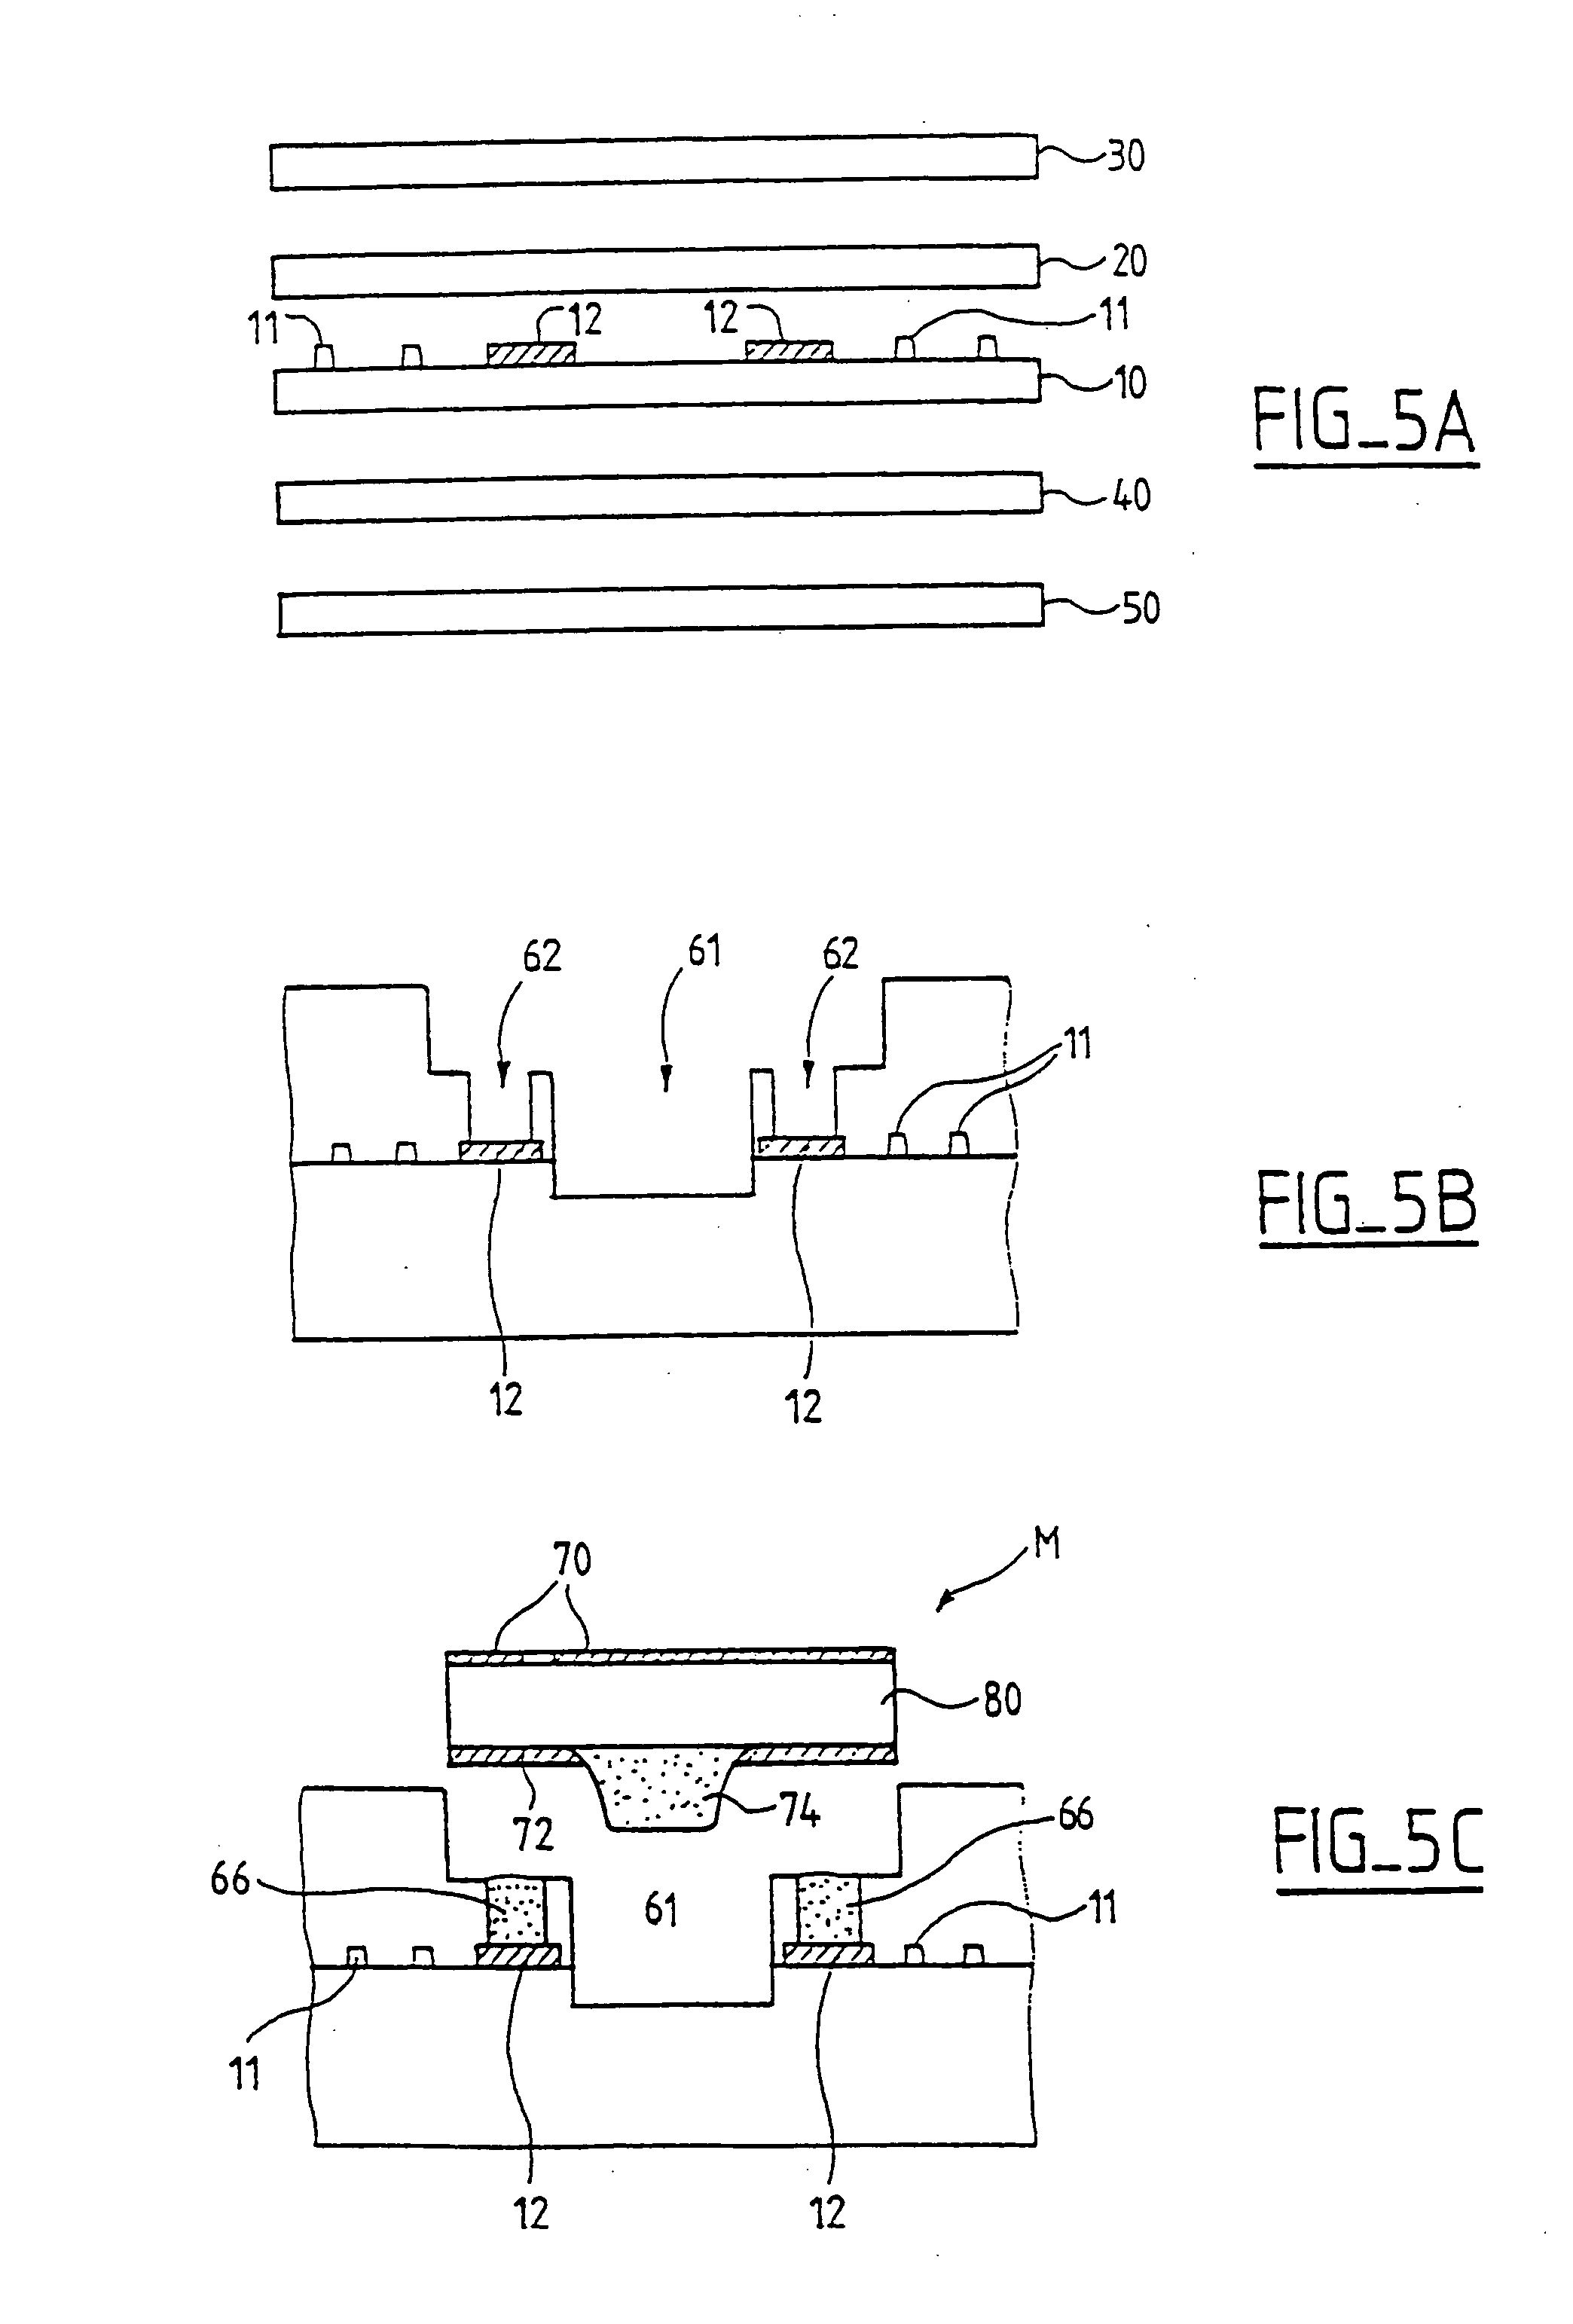 Method for making smart cards capable of operating with and without contact